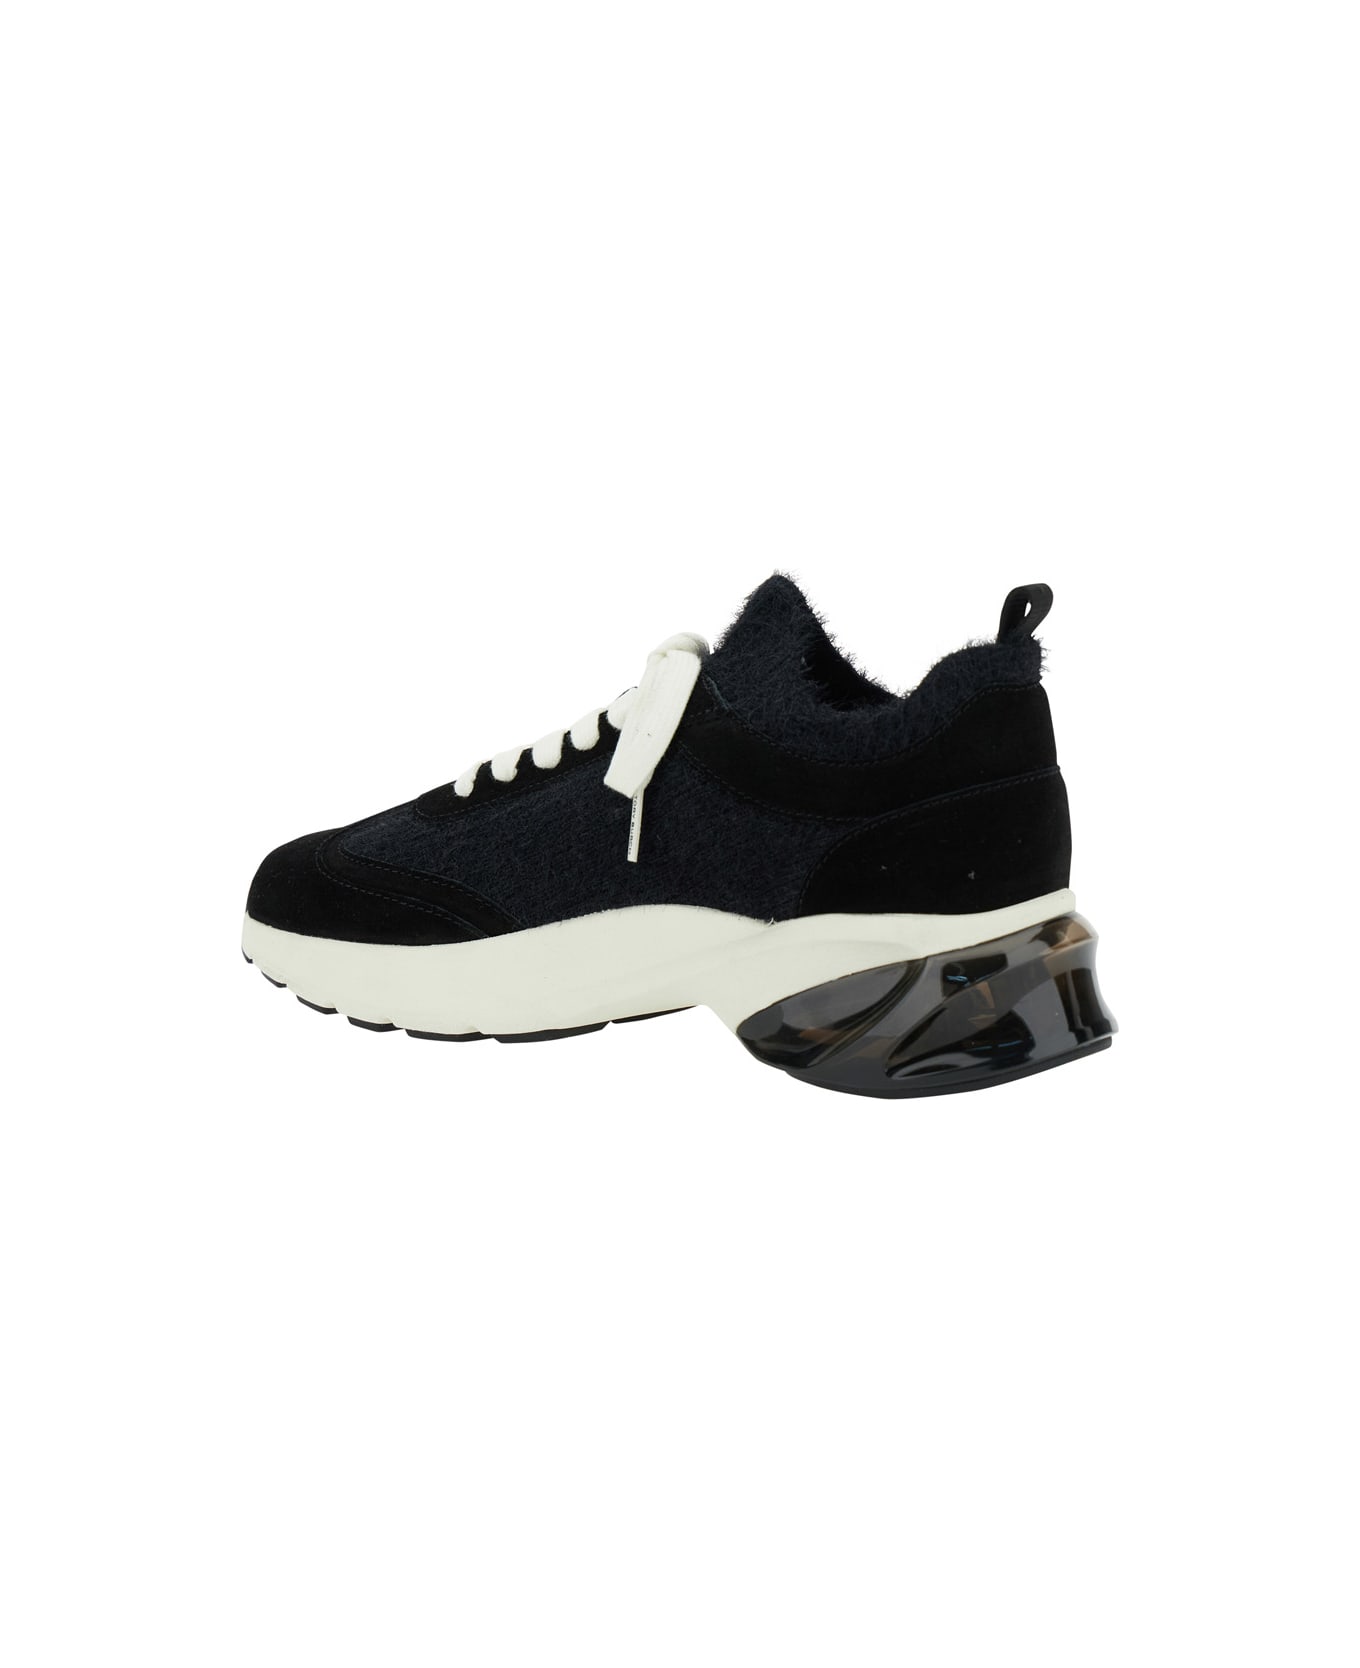 Tory Burch 'good Luck' Multicolor Sneakers With Running Sole In Leather Woman - Black スニーカー